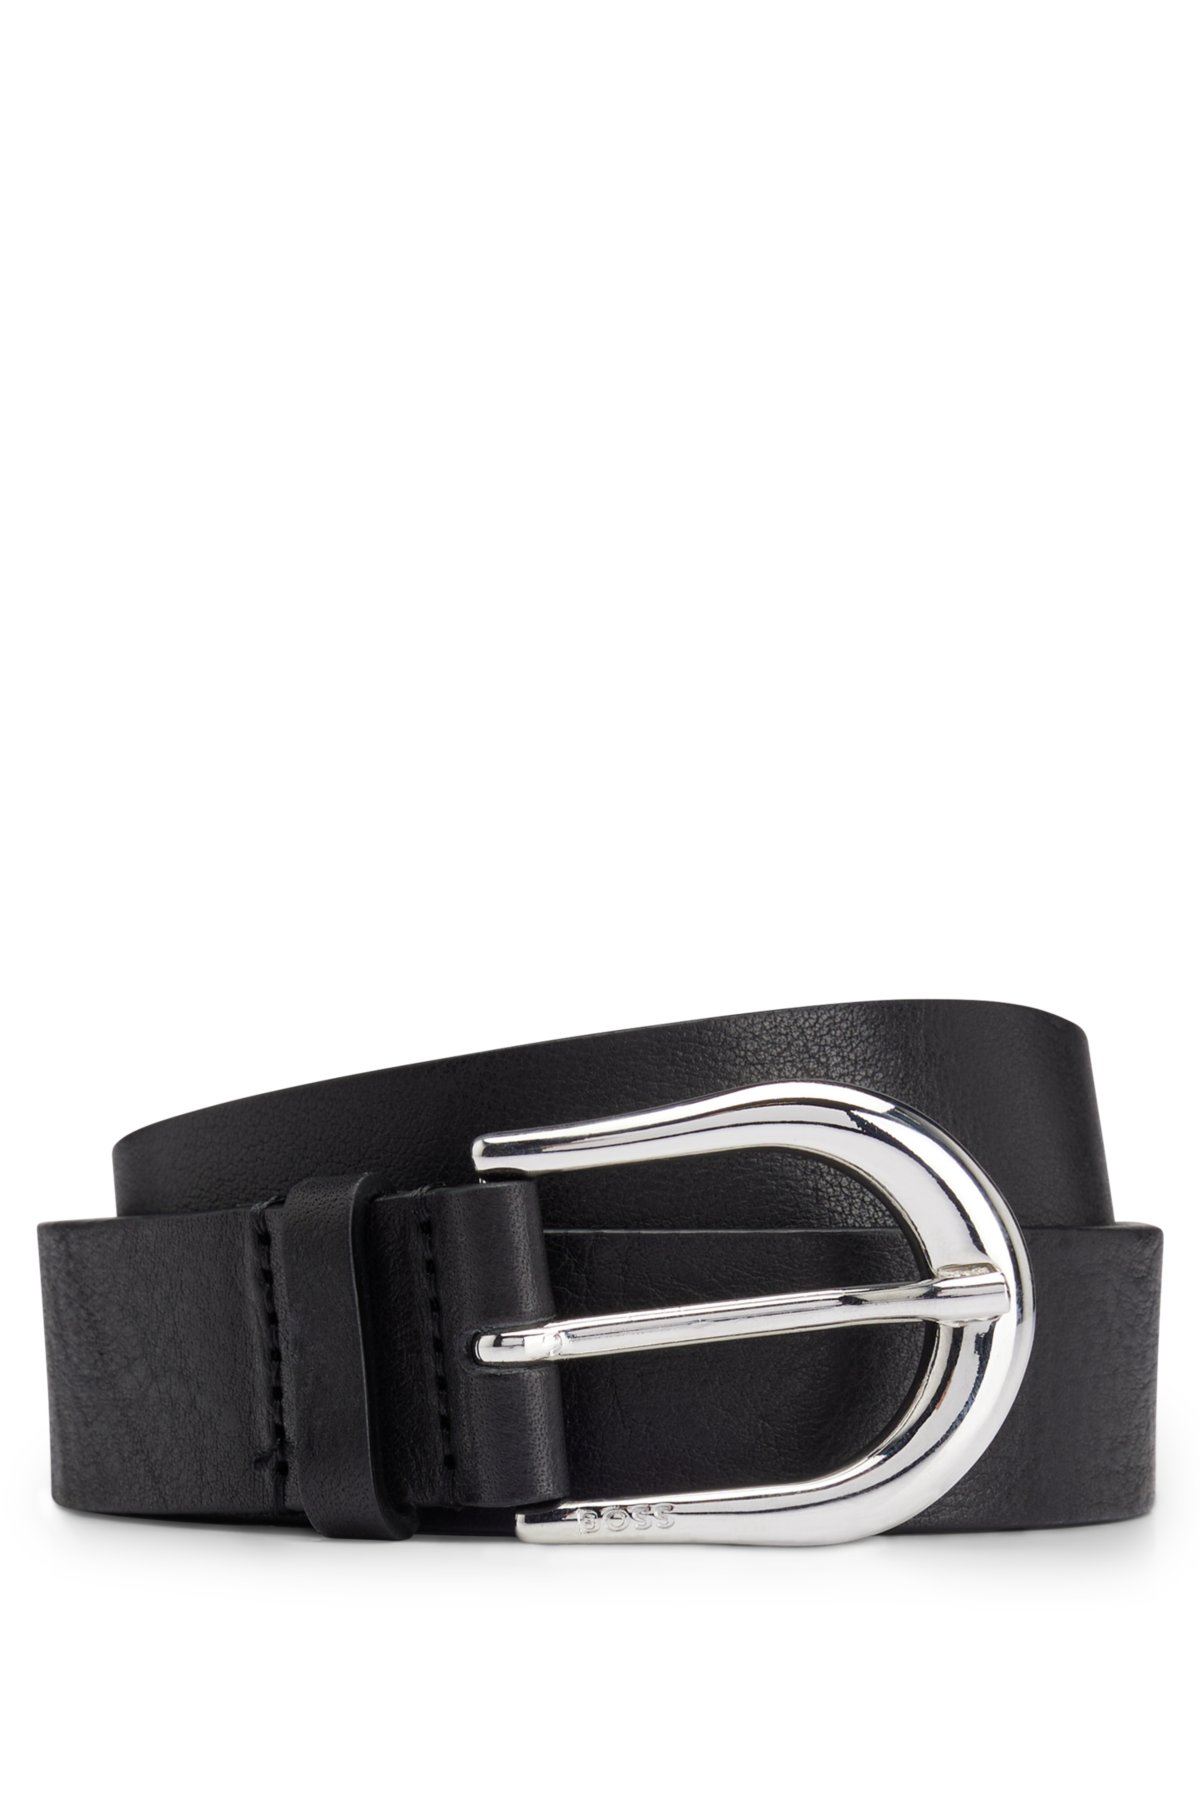 BOSS - Italian-made leather belt with logo-engraved buckle